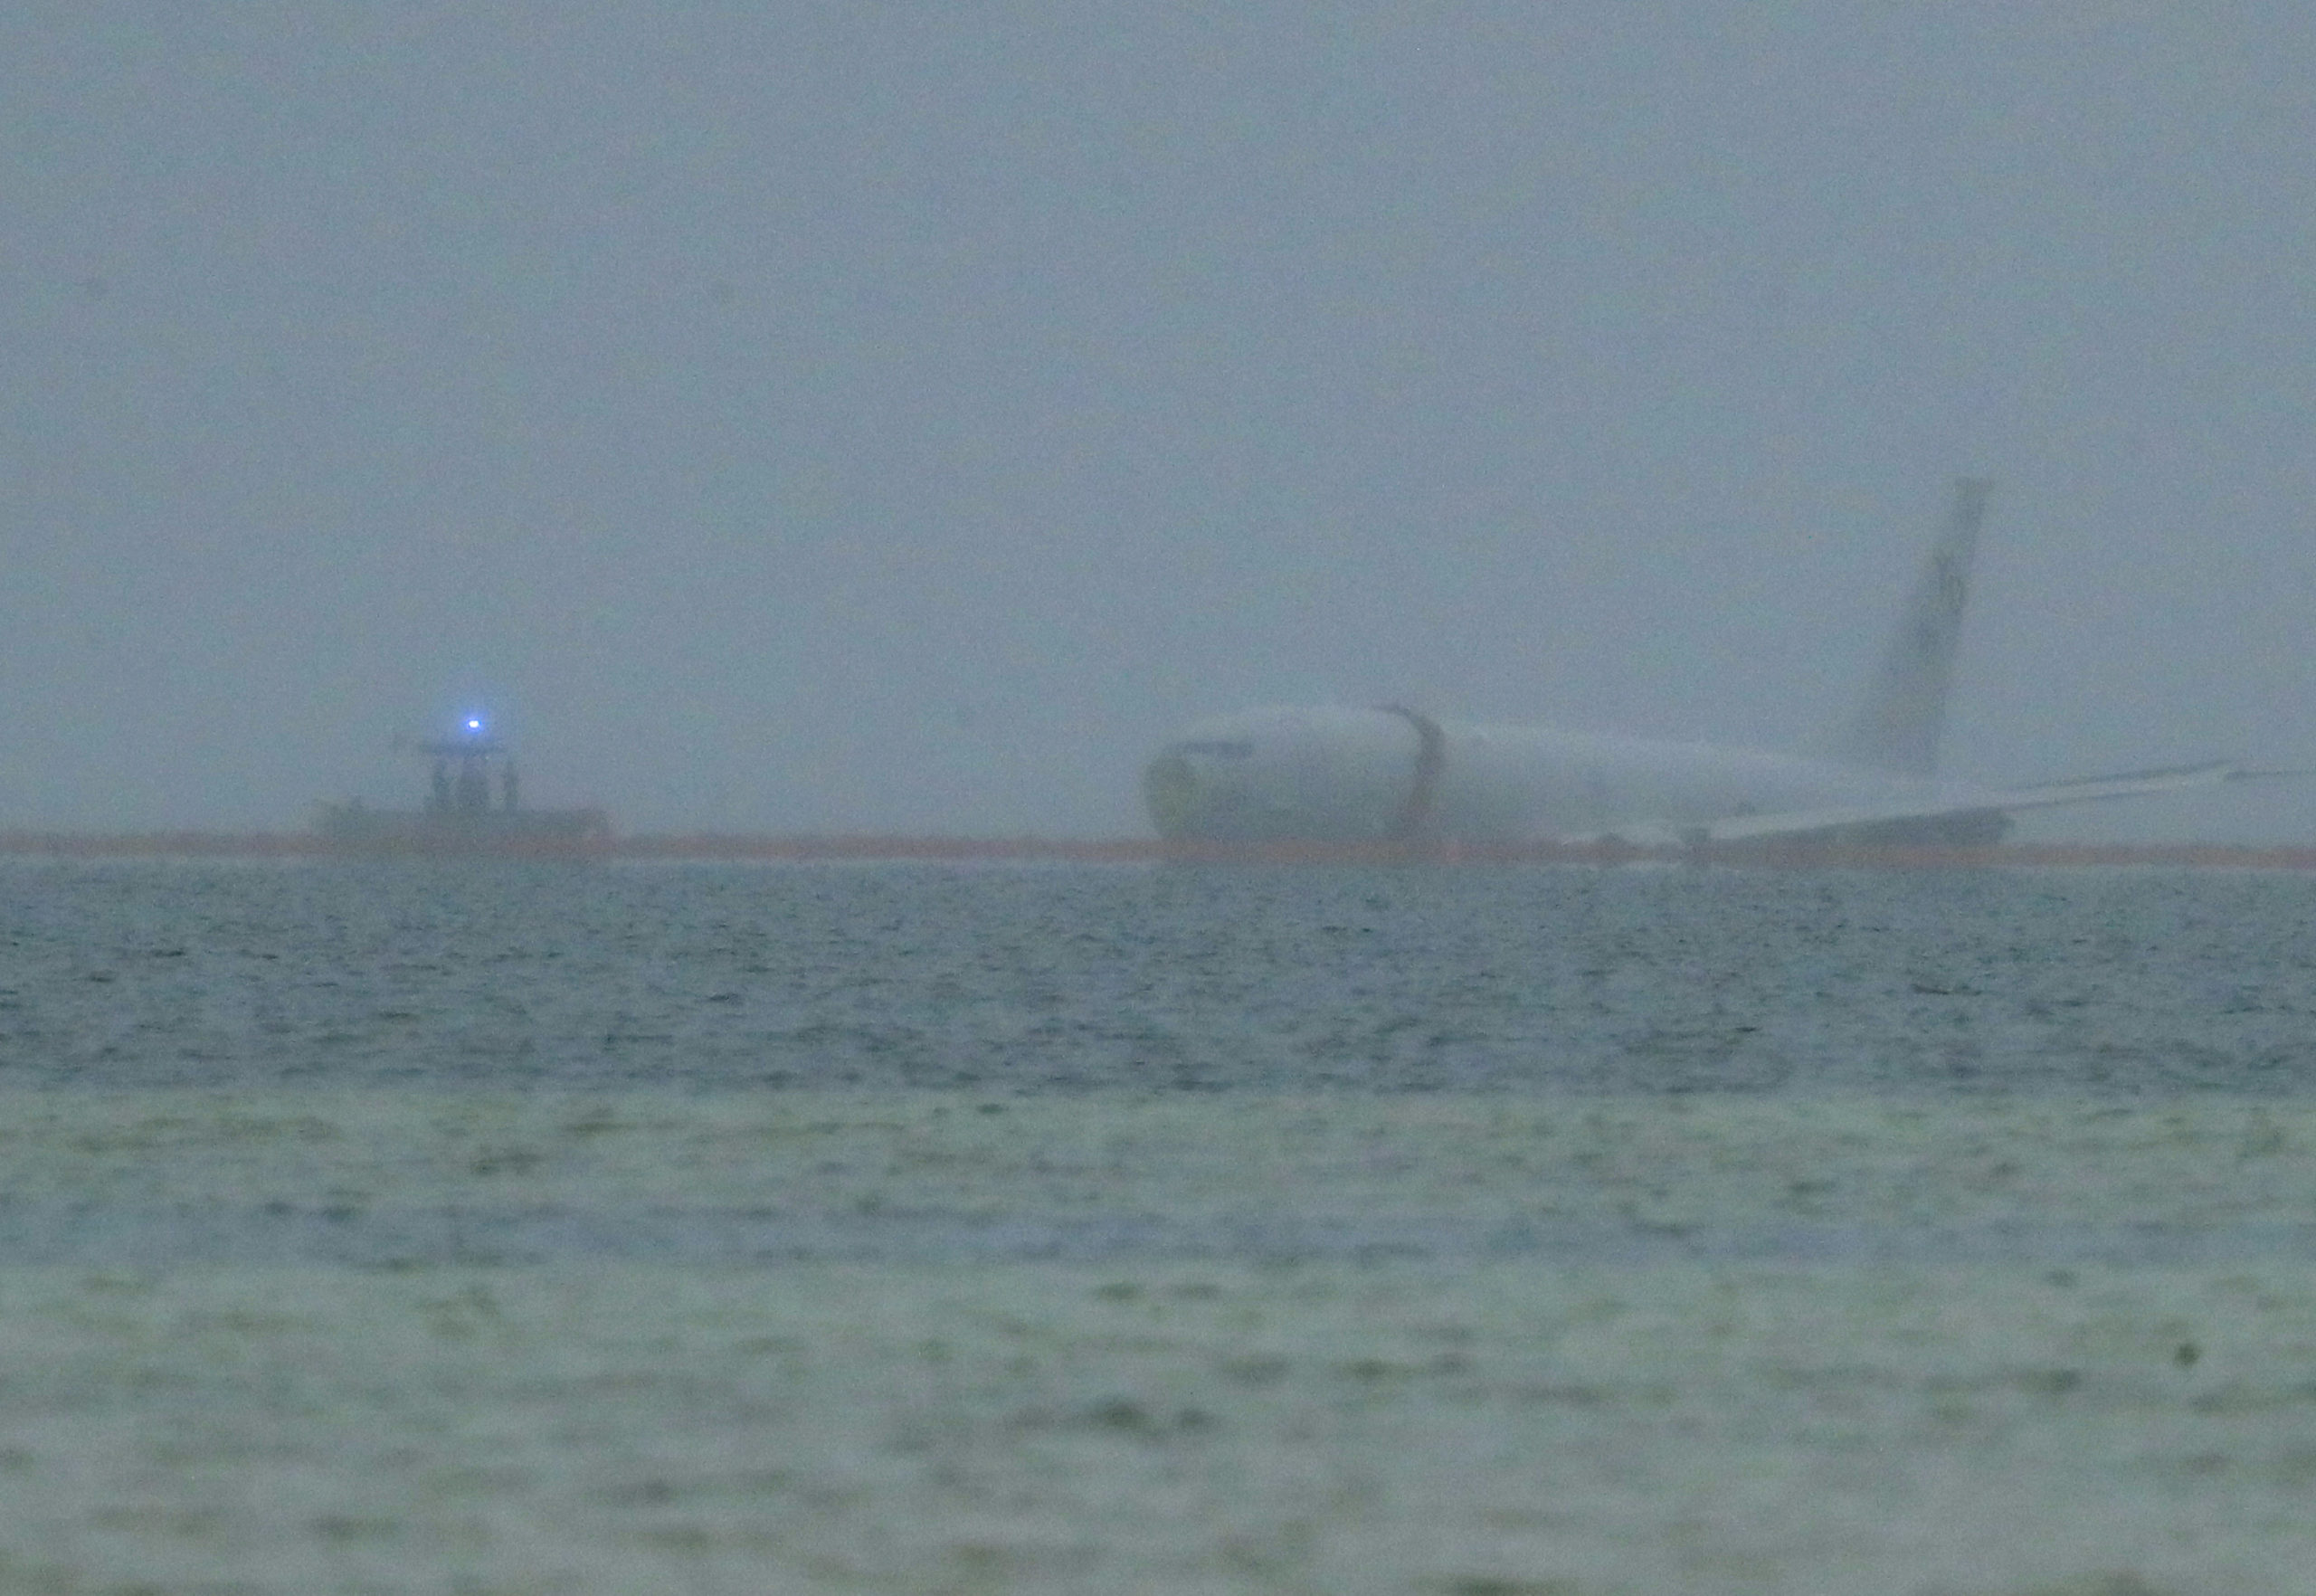 A U.S. Navy aircraft is seen in Kaneohe Bay in Hawaii on Monday. The plane overshot a runway and landed in the water.